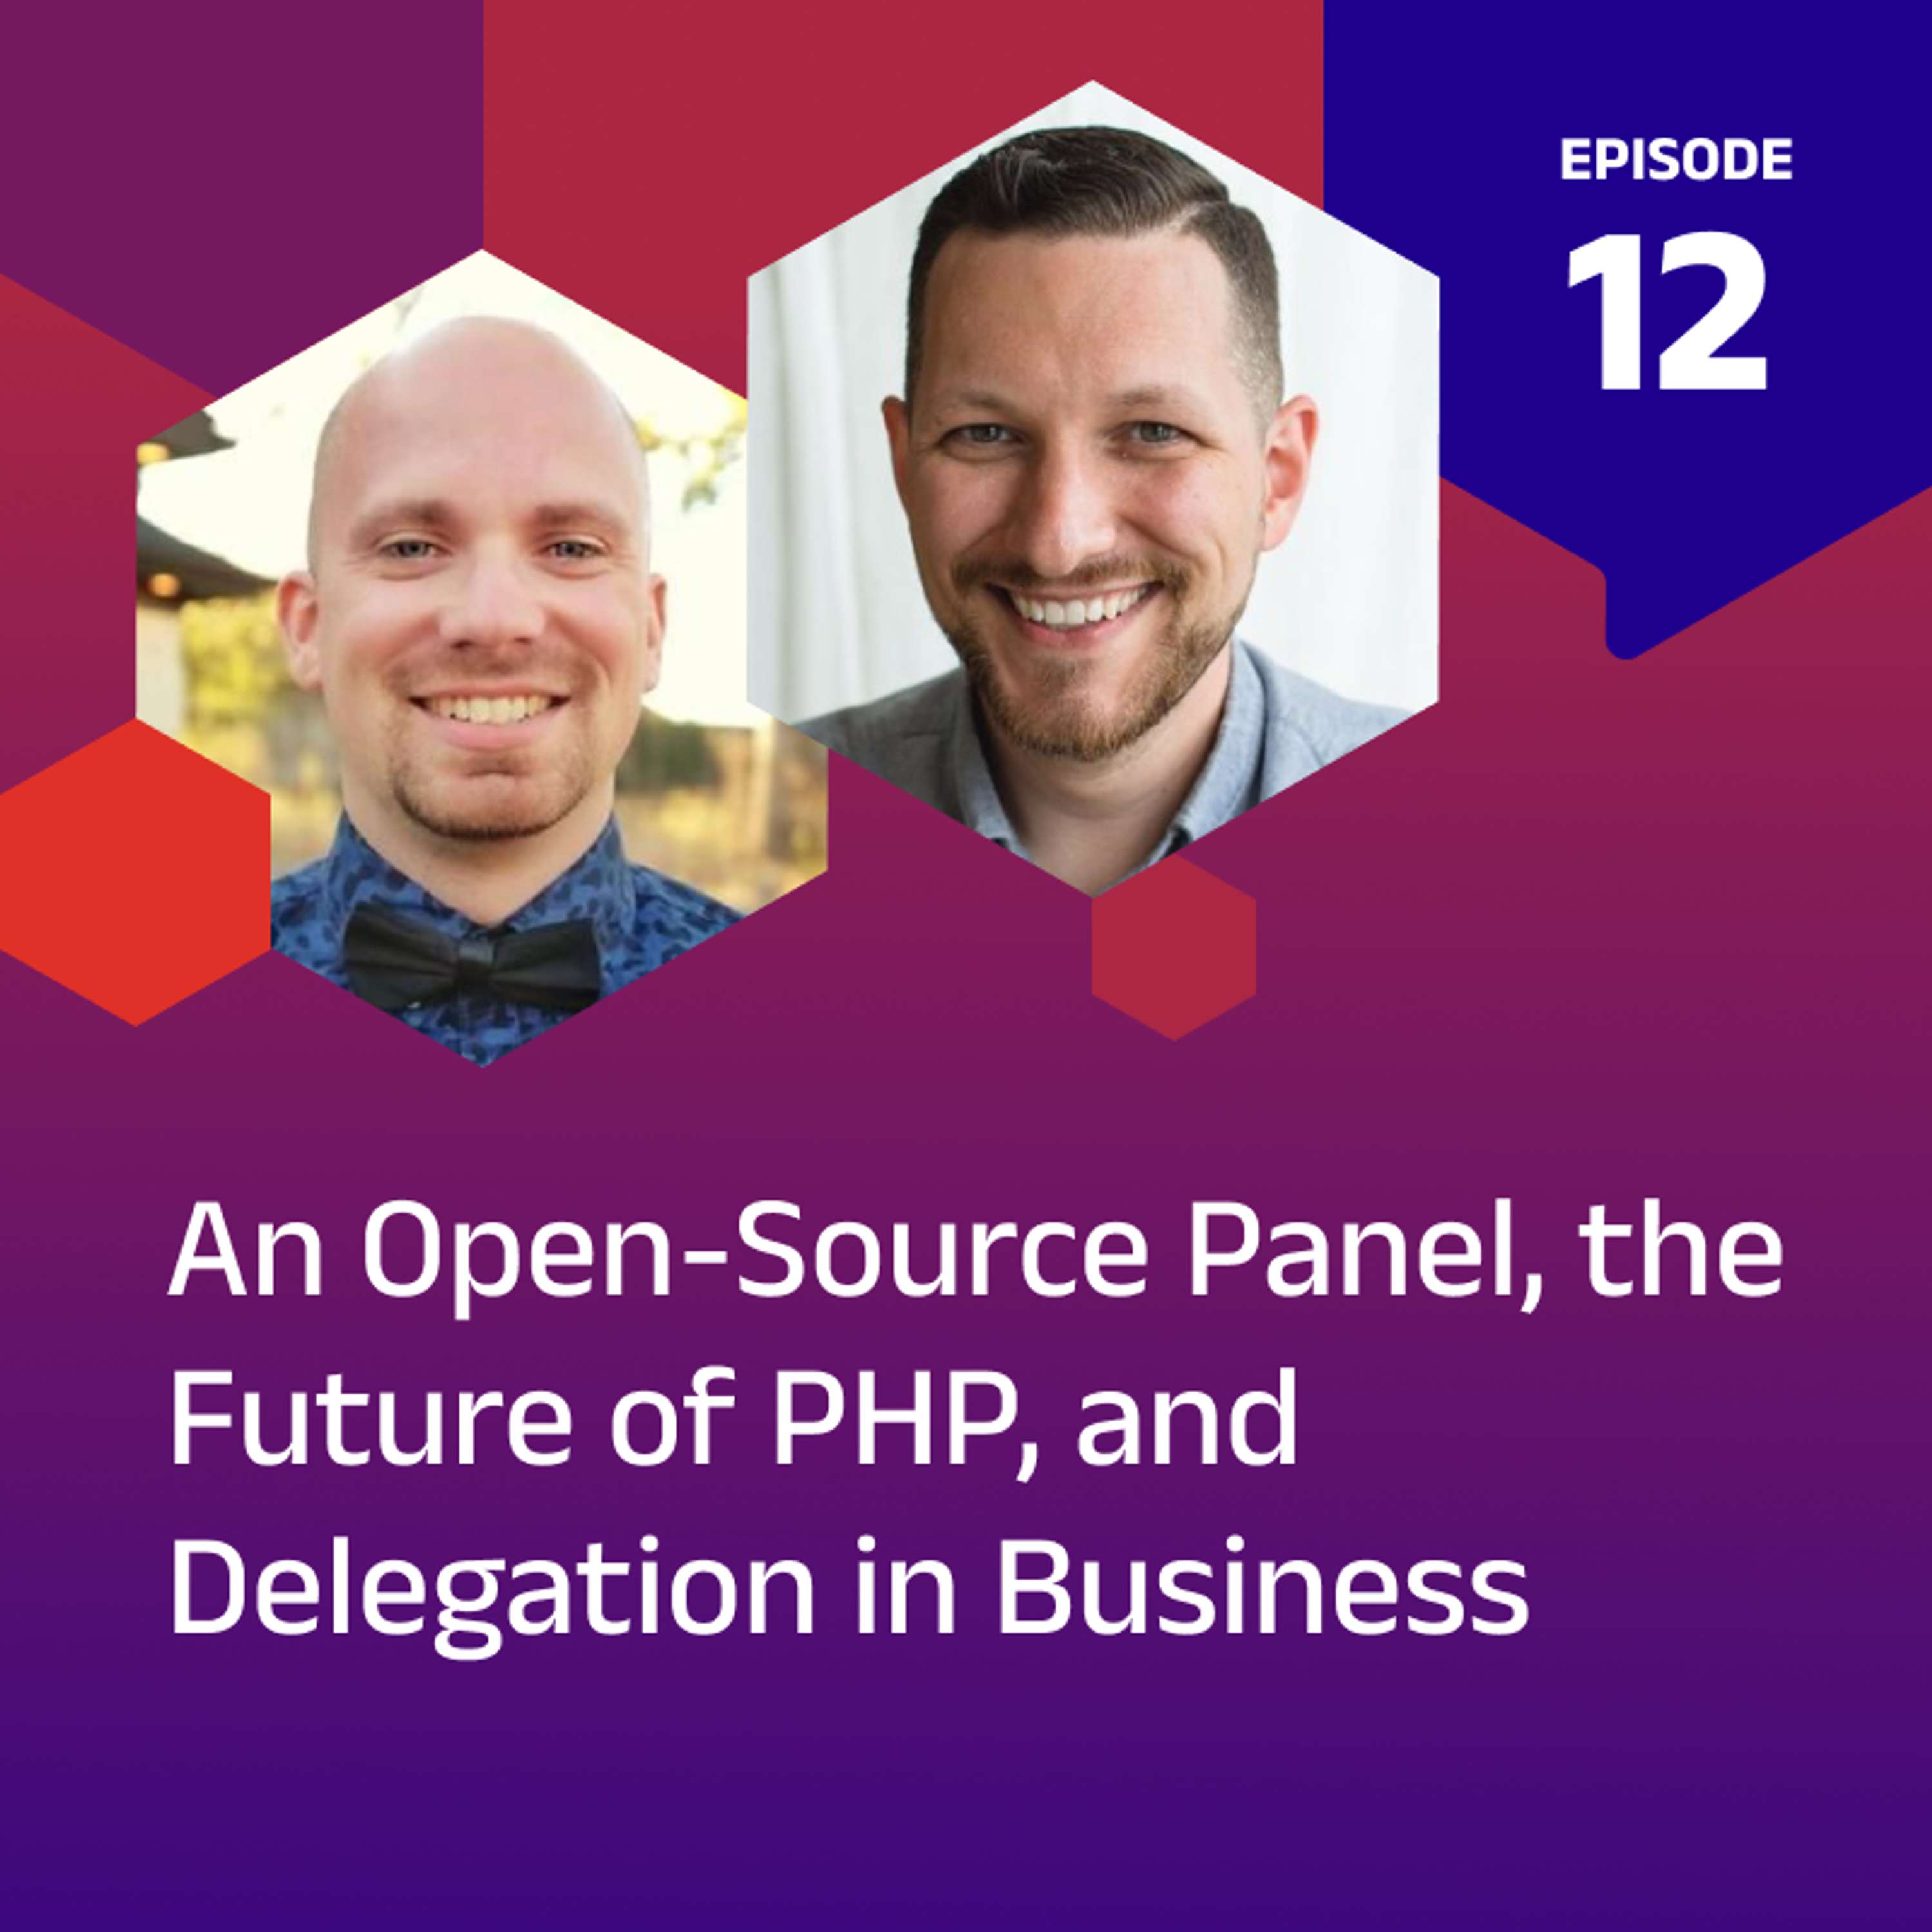 An Open-Source Panel, the Future of PHP, and Delegation in Business